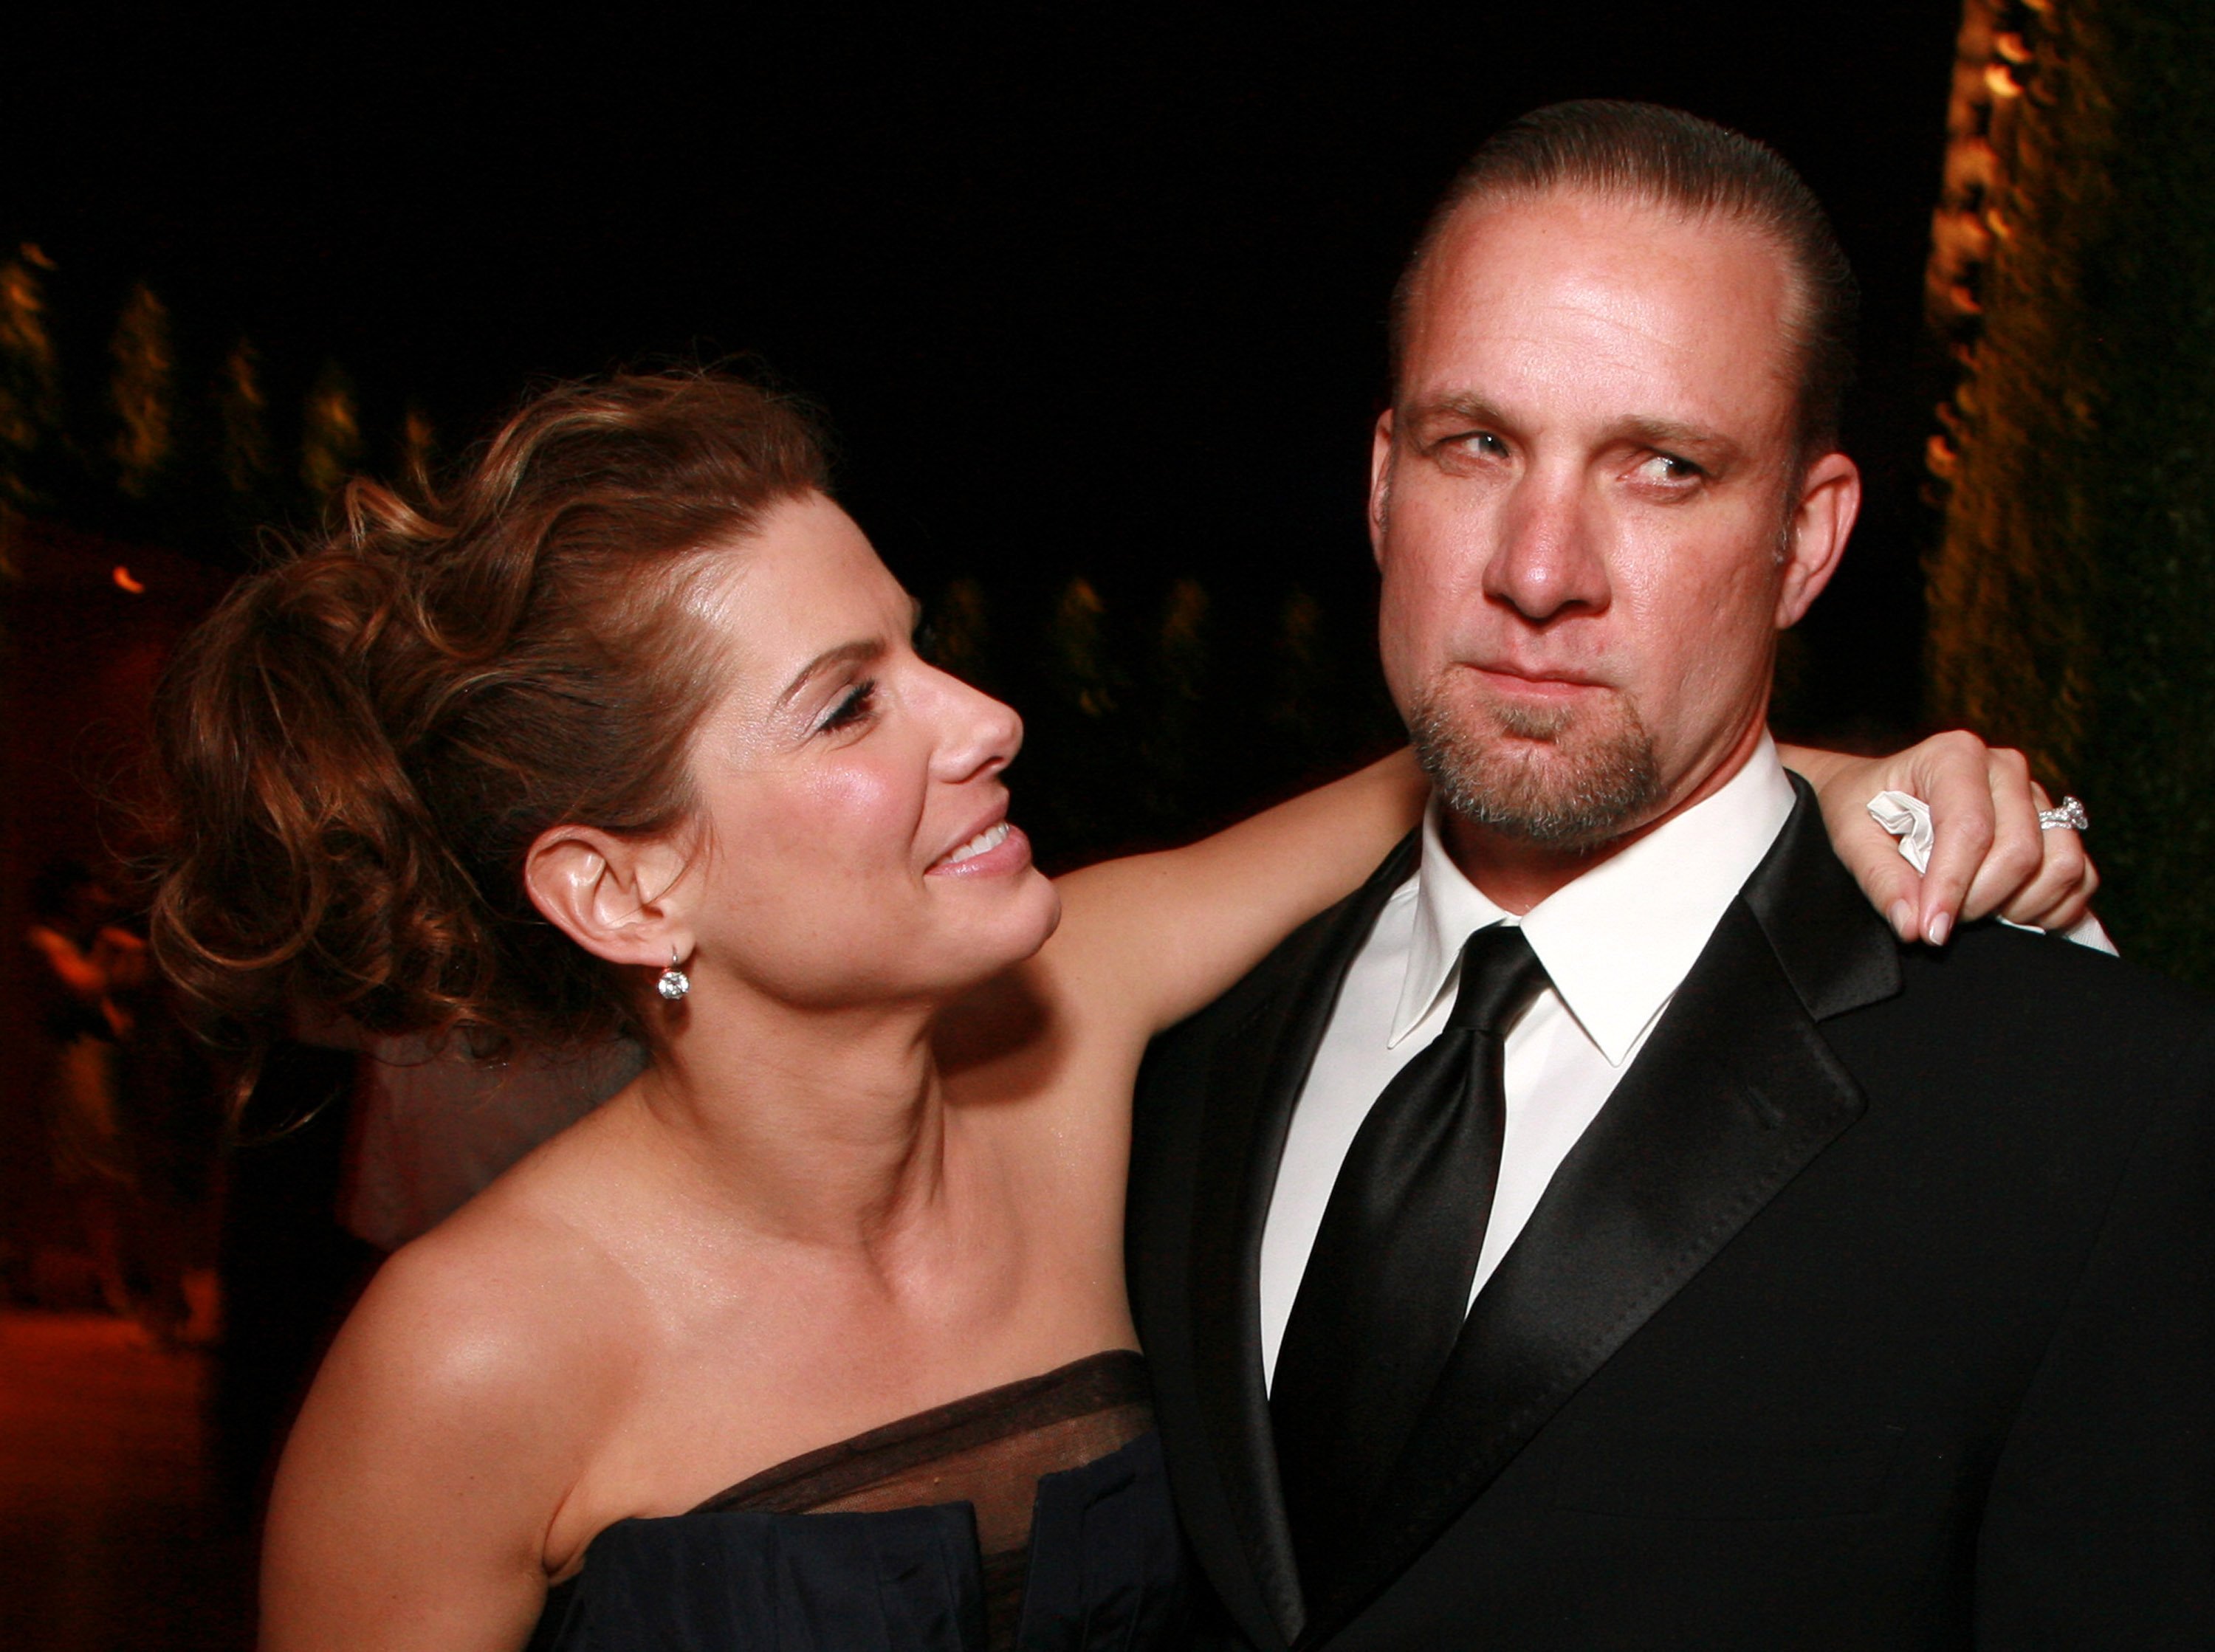 Sandra Bullock and husband Jesse James at the 2006 Vanity Fair Oscar Party. / Source: Getty Images